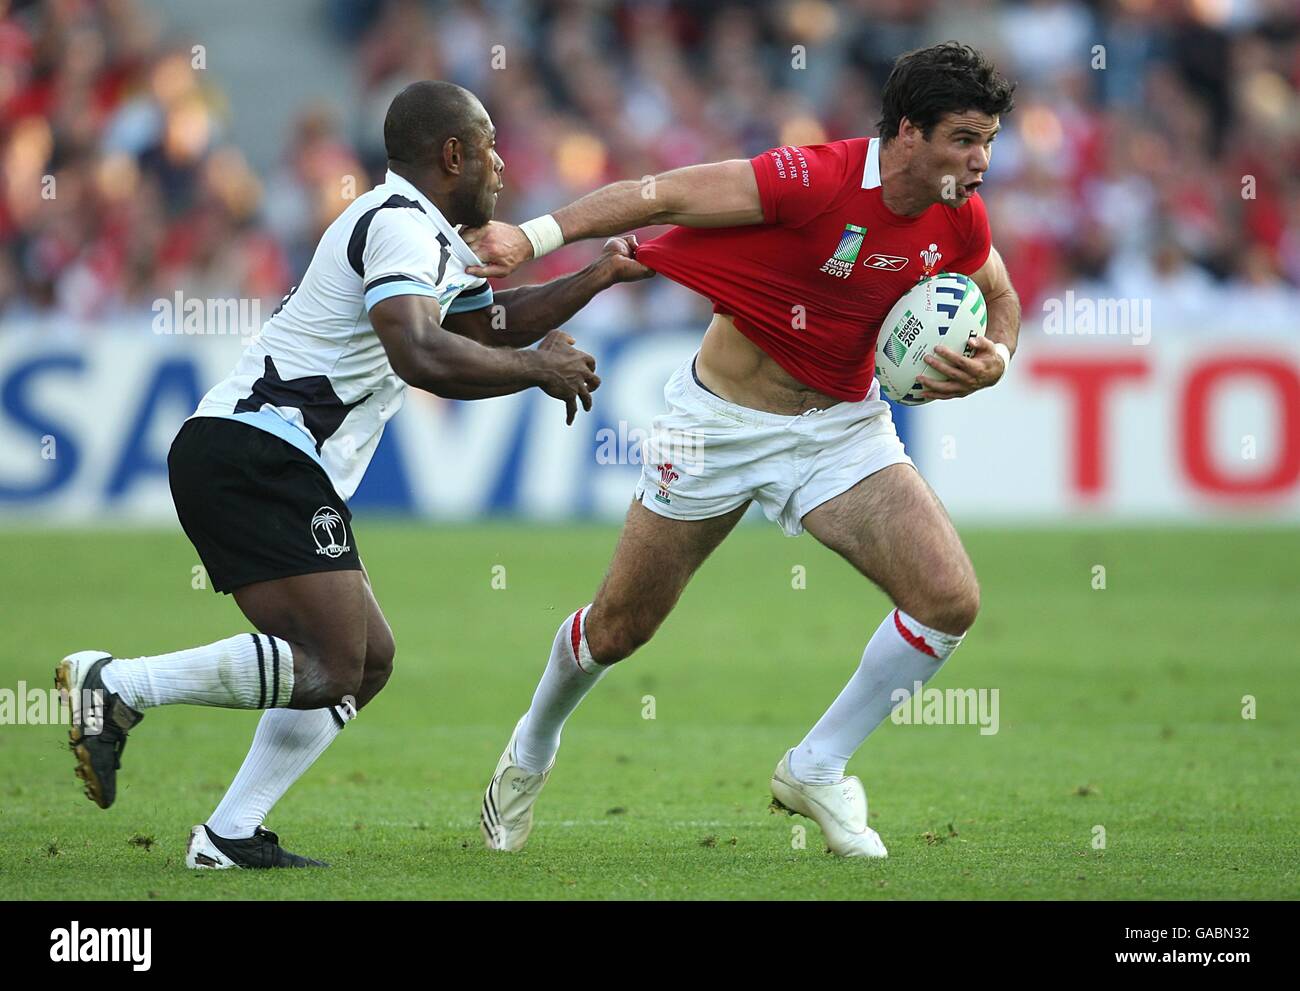 Rugby Union - IRB Rugby World Cup 2007 - Pool B - Wales v Fiji - Stade de la Beaujoire. Wales' Michael Phillips hands off the tackle Stock Photo